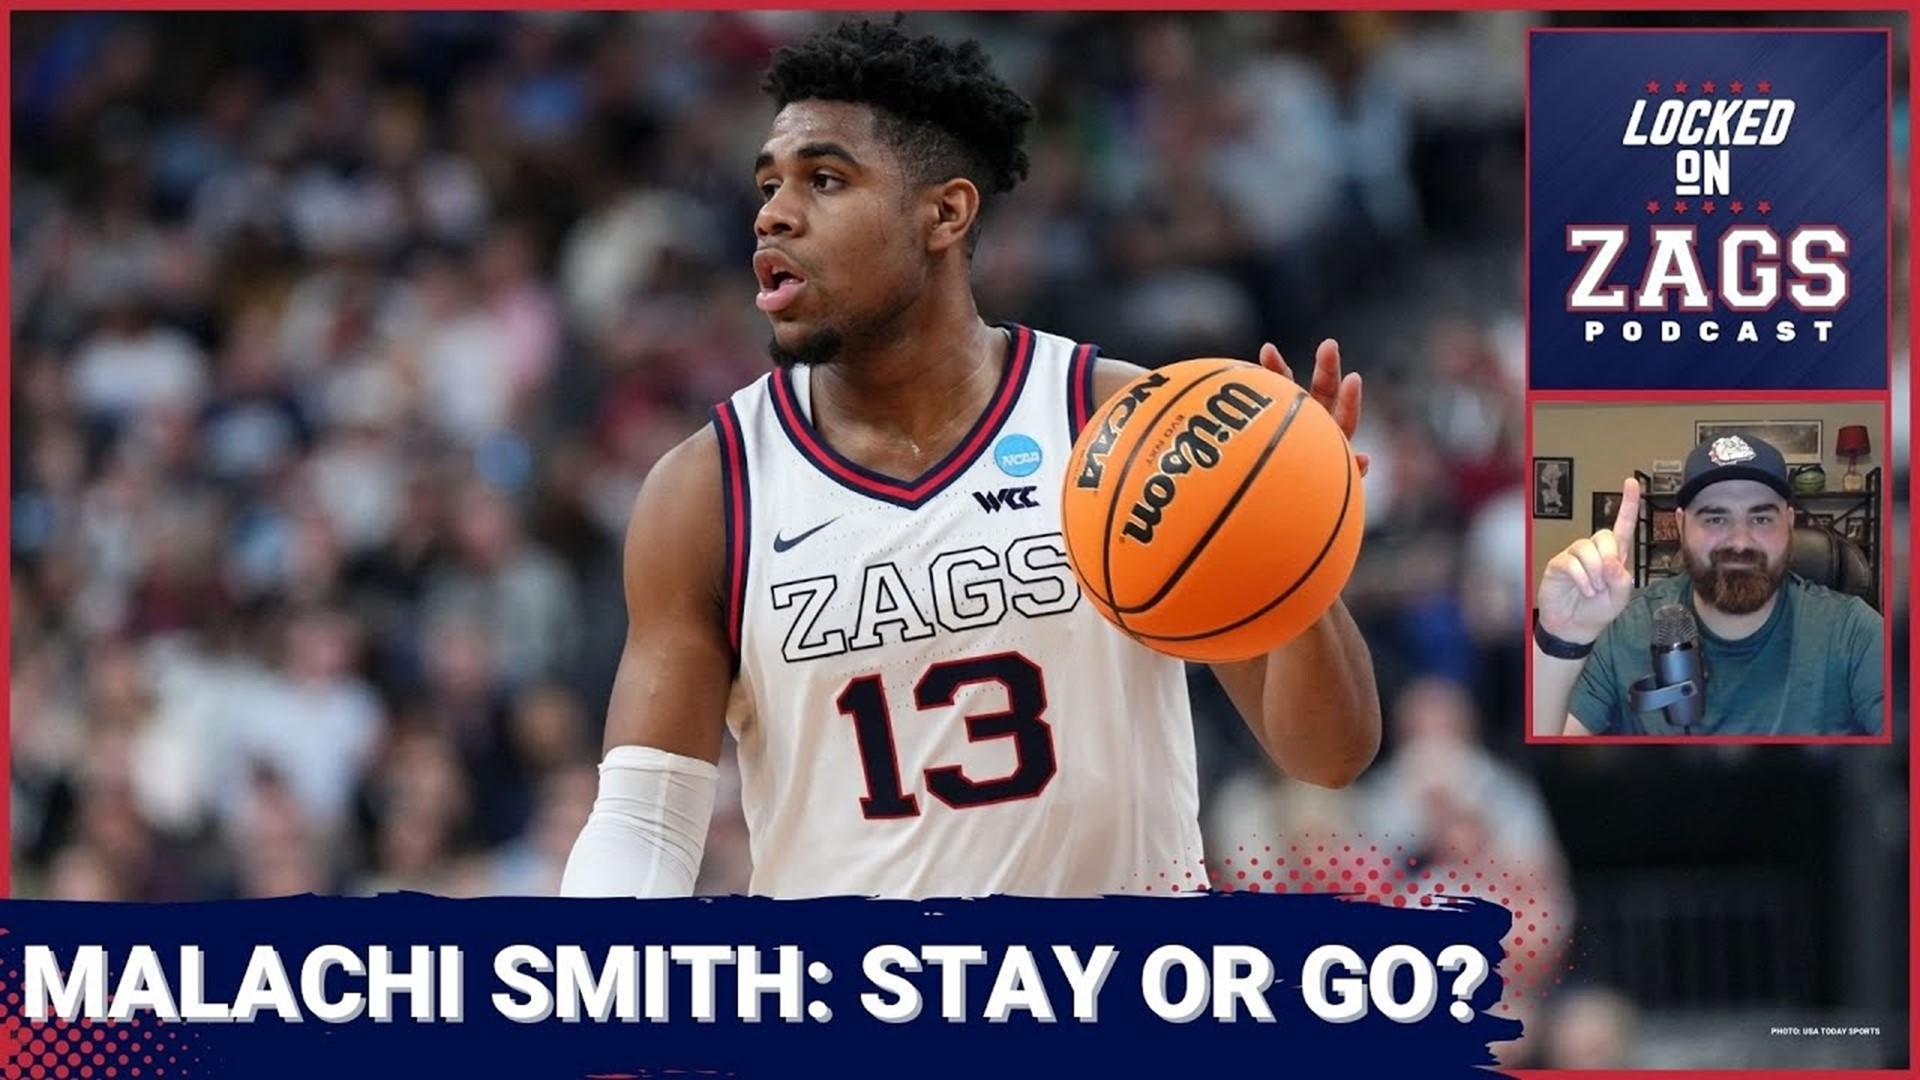 Gonzaga Bulldogs guard Malachi Smith remains undecided whether he will return to Spokane and the Zags or if he will pursue a professional basketball career.